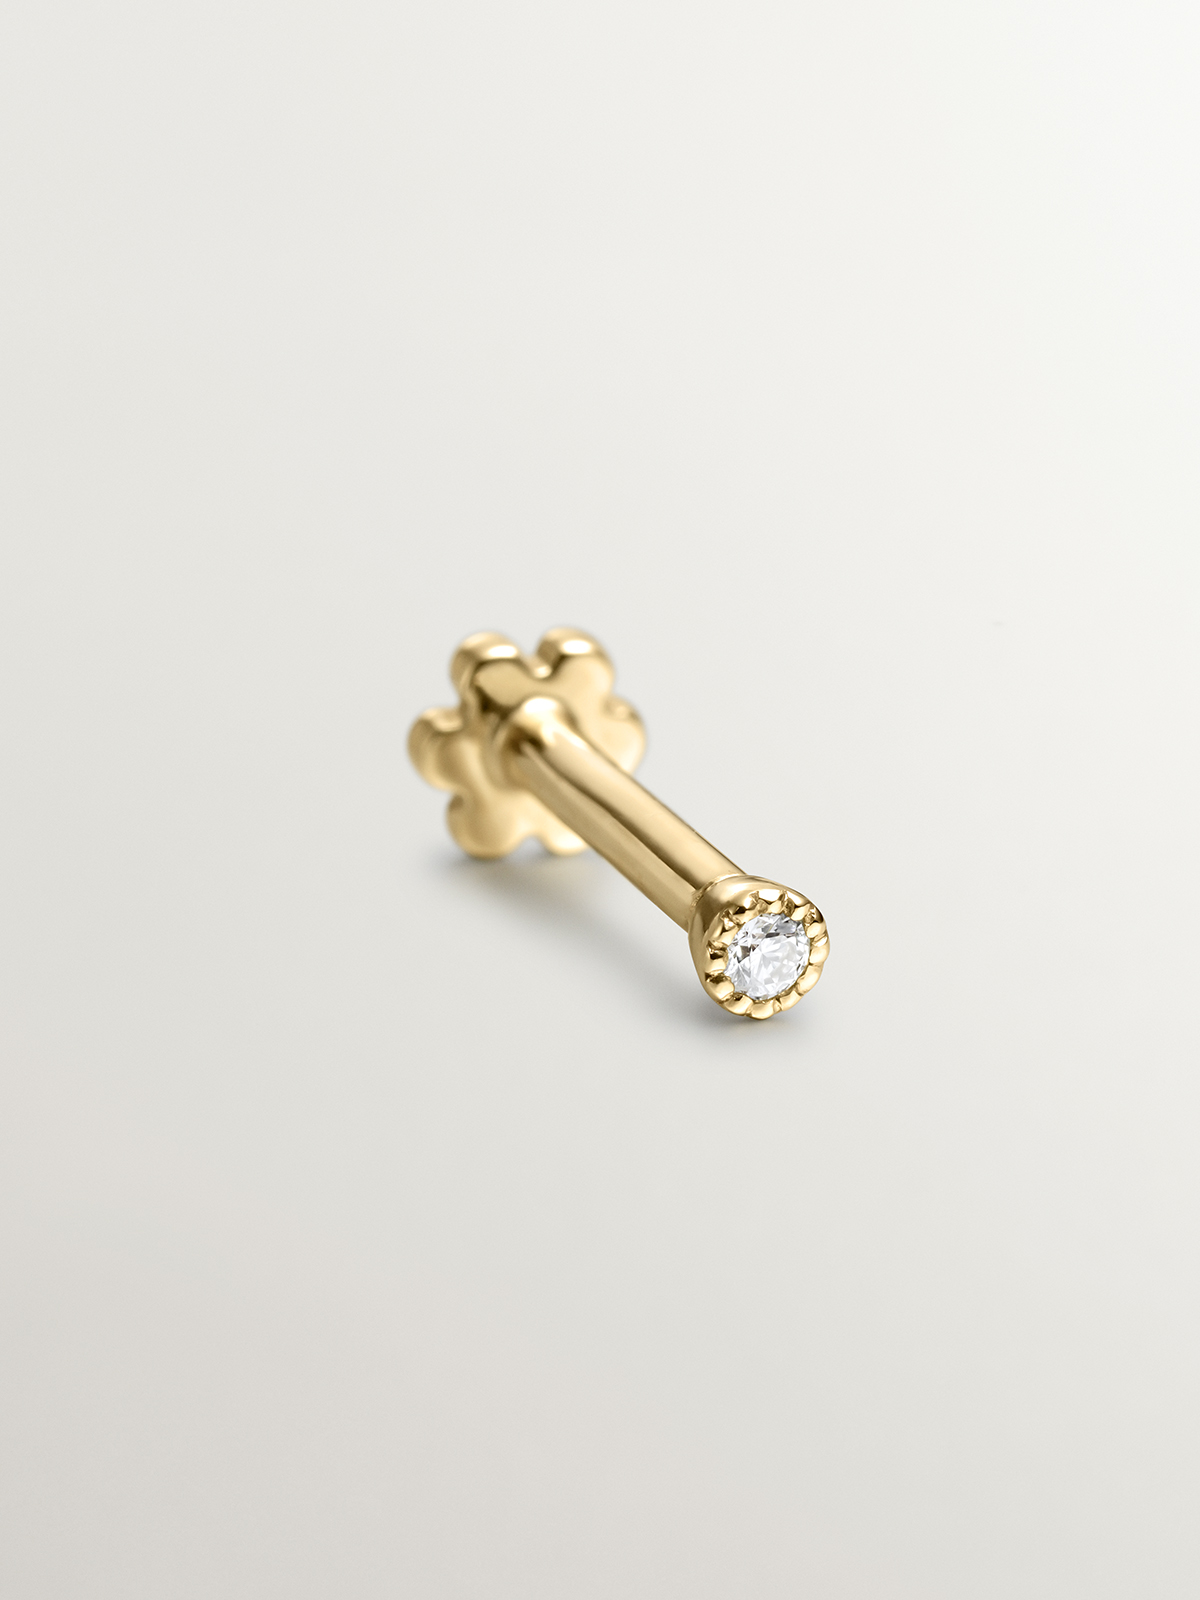 Individual 9K yellow gold piercing with diamond